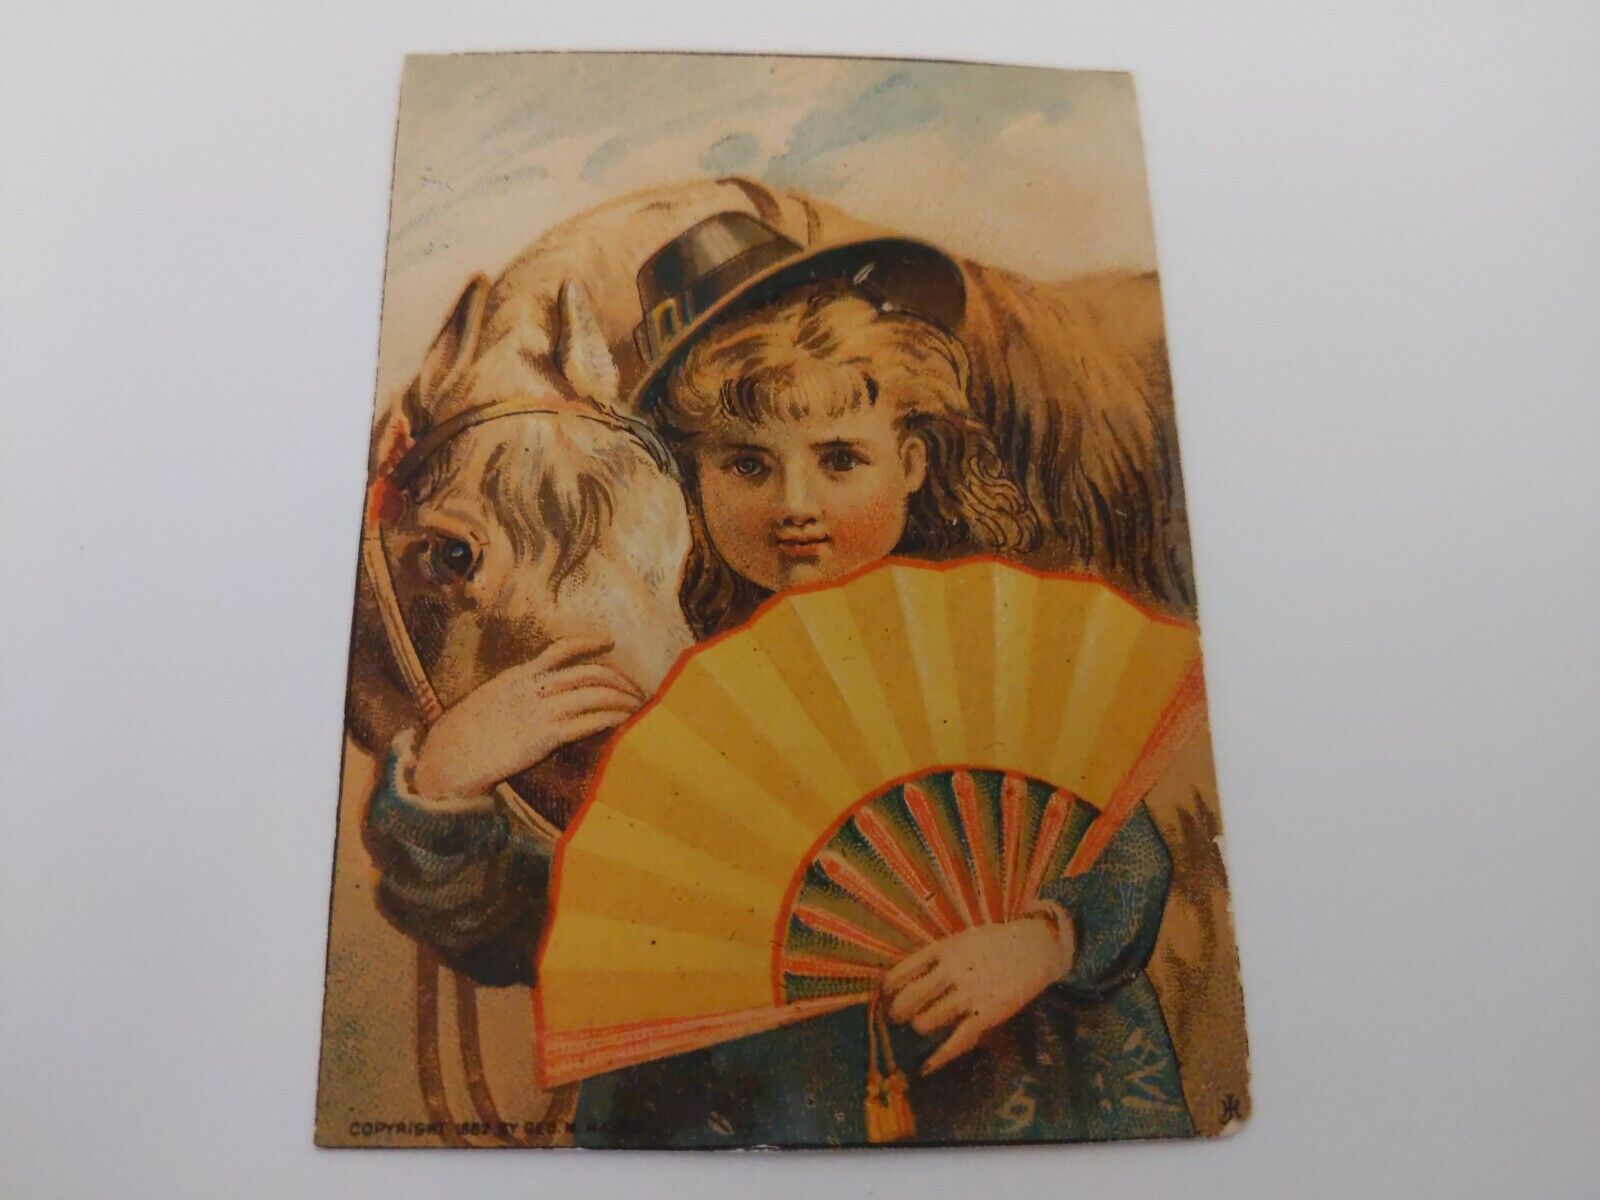 Girl With A Japanese Fan Snuggling Her Horse Victorian Trade Card 1880s